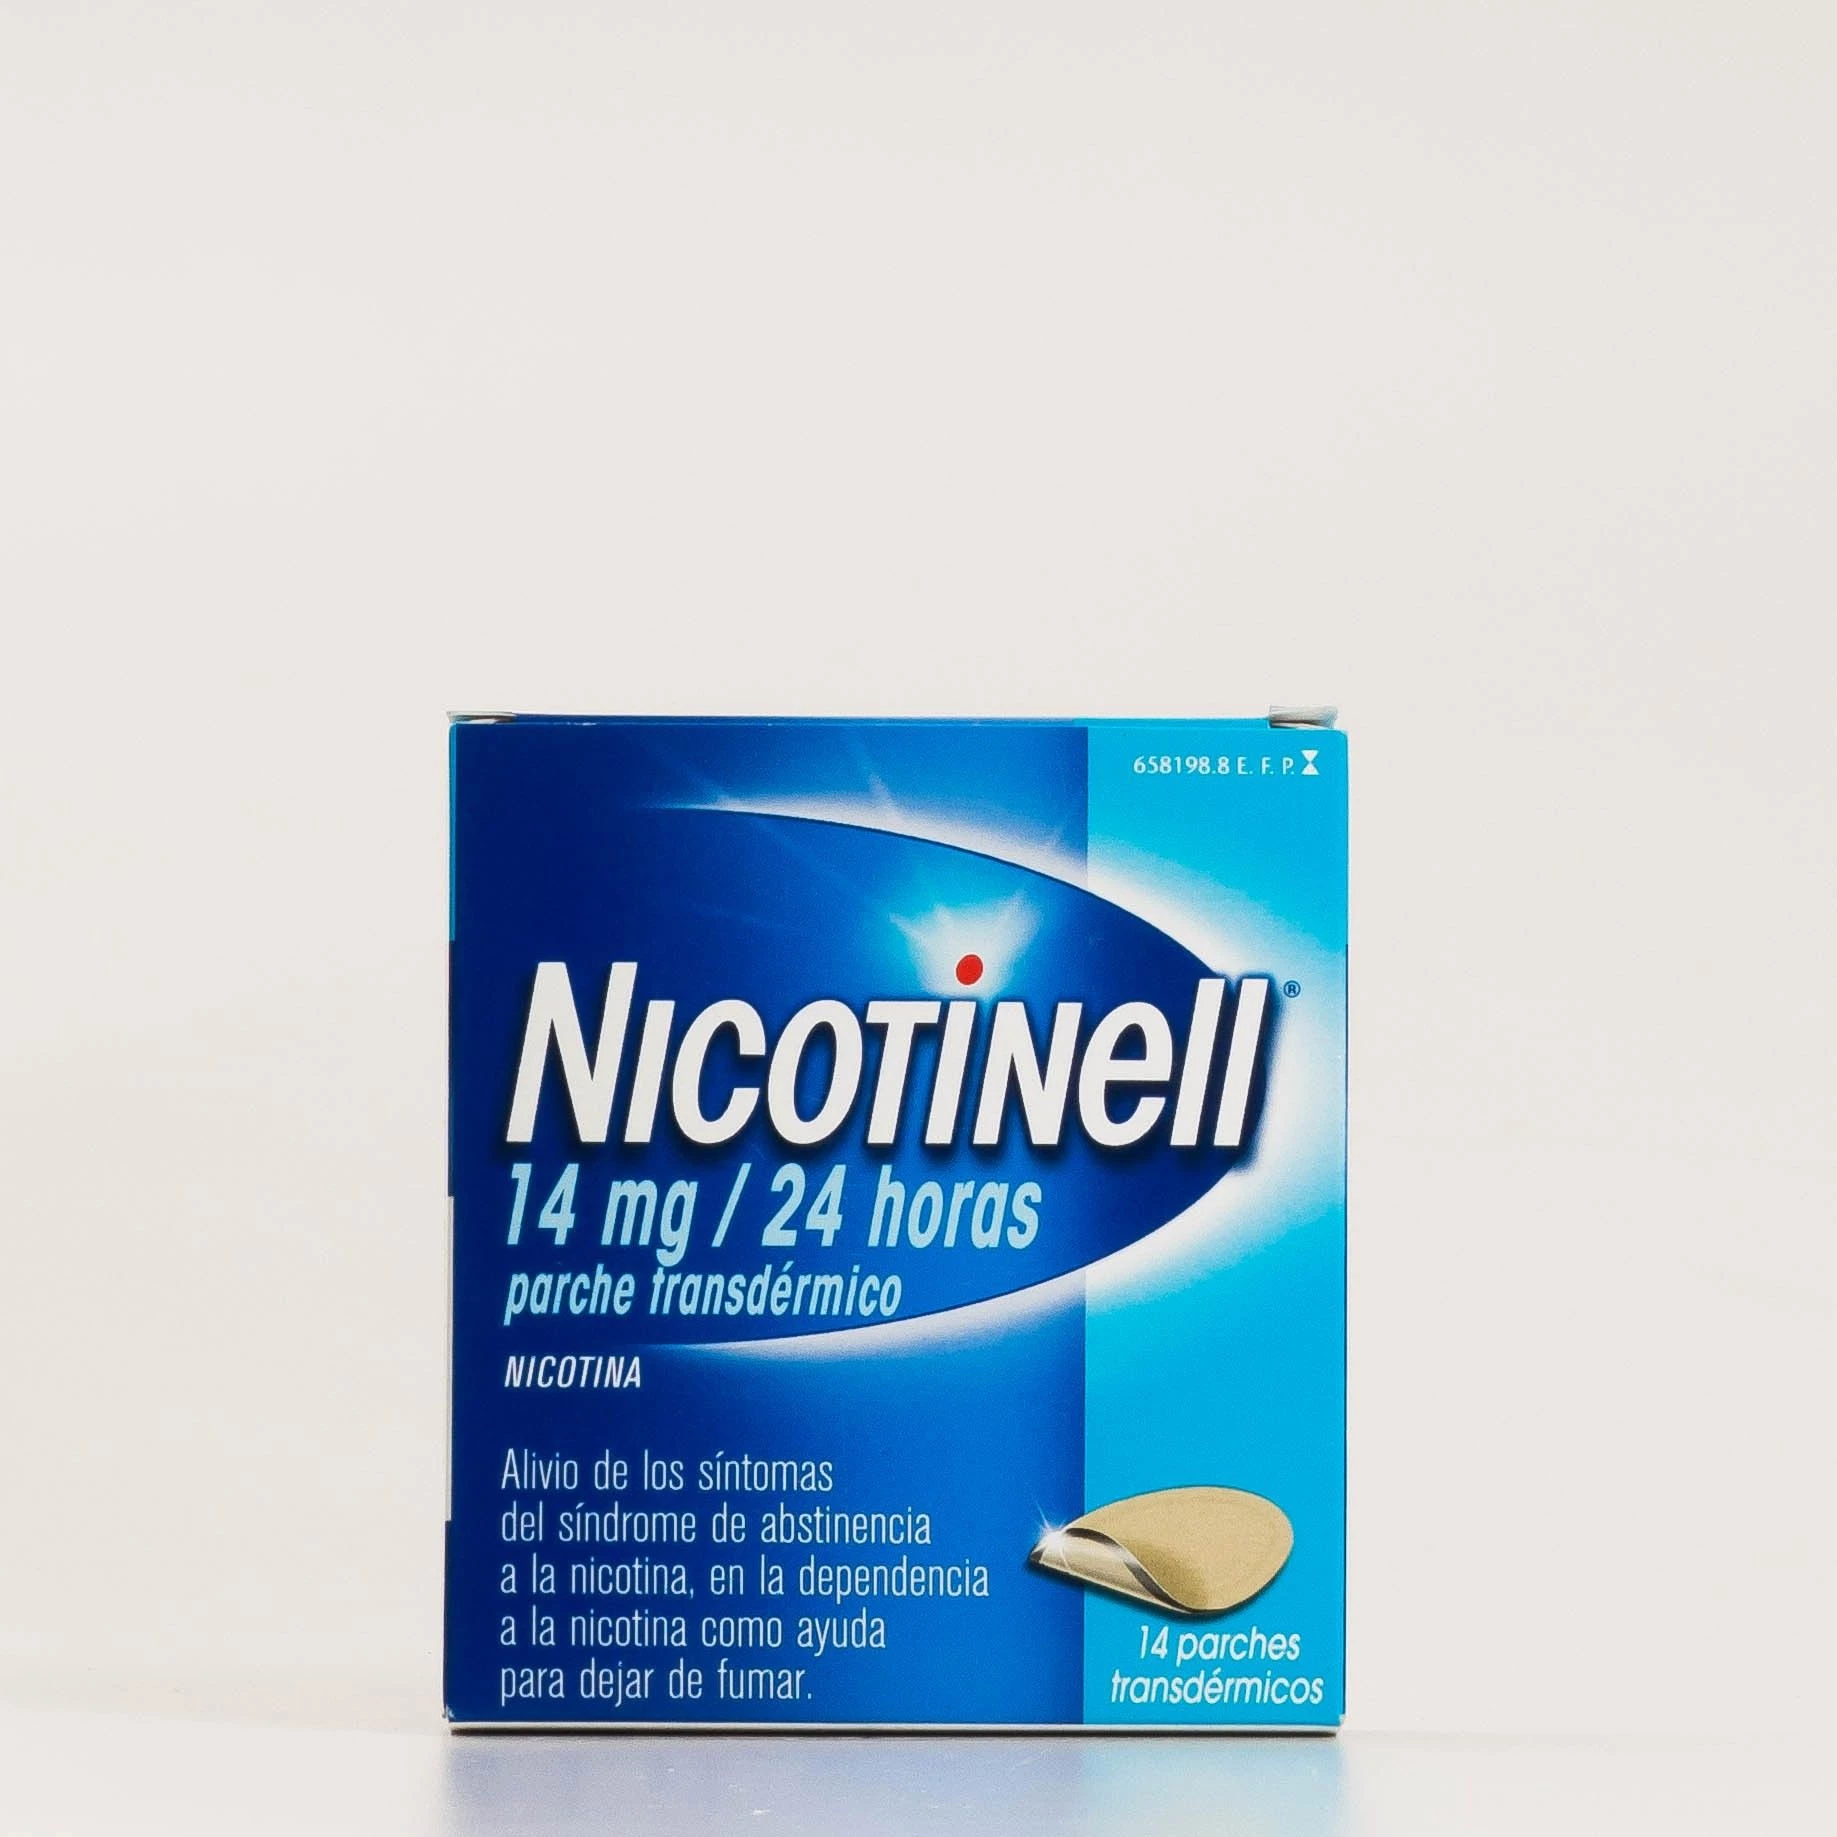 Nicotinell 14mg/24h 14 parches trandérmicos